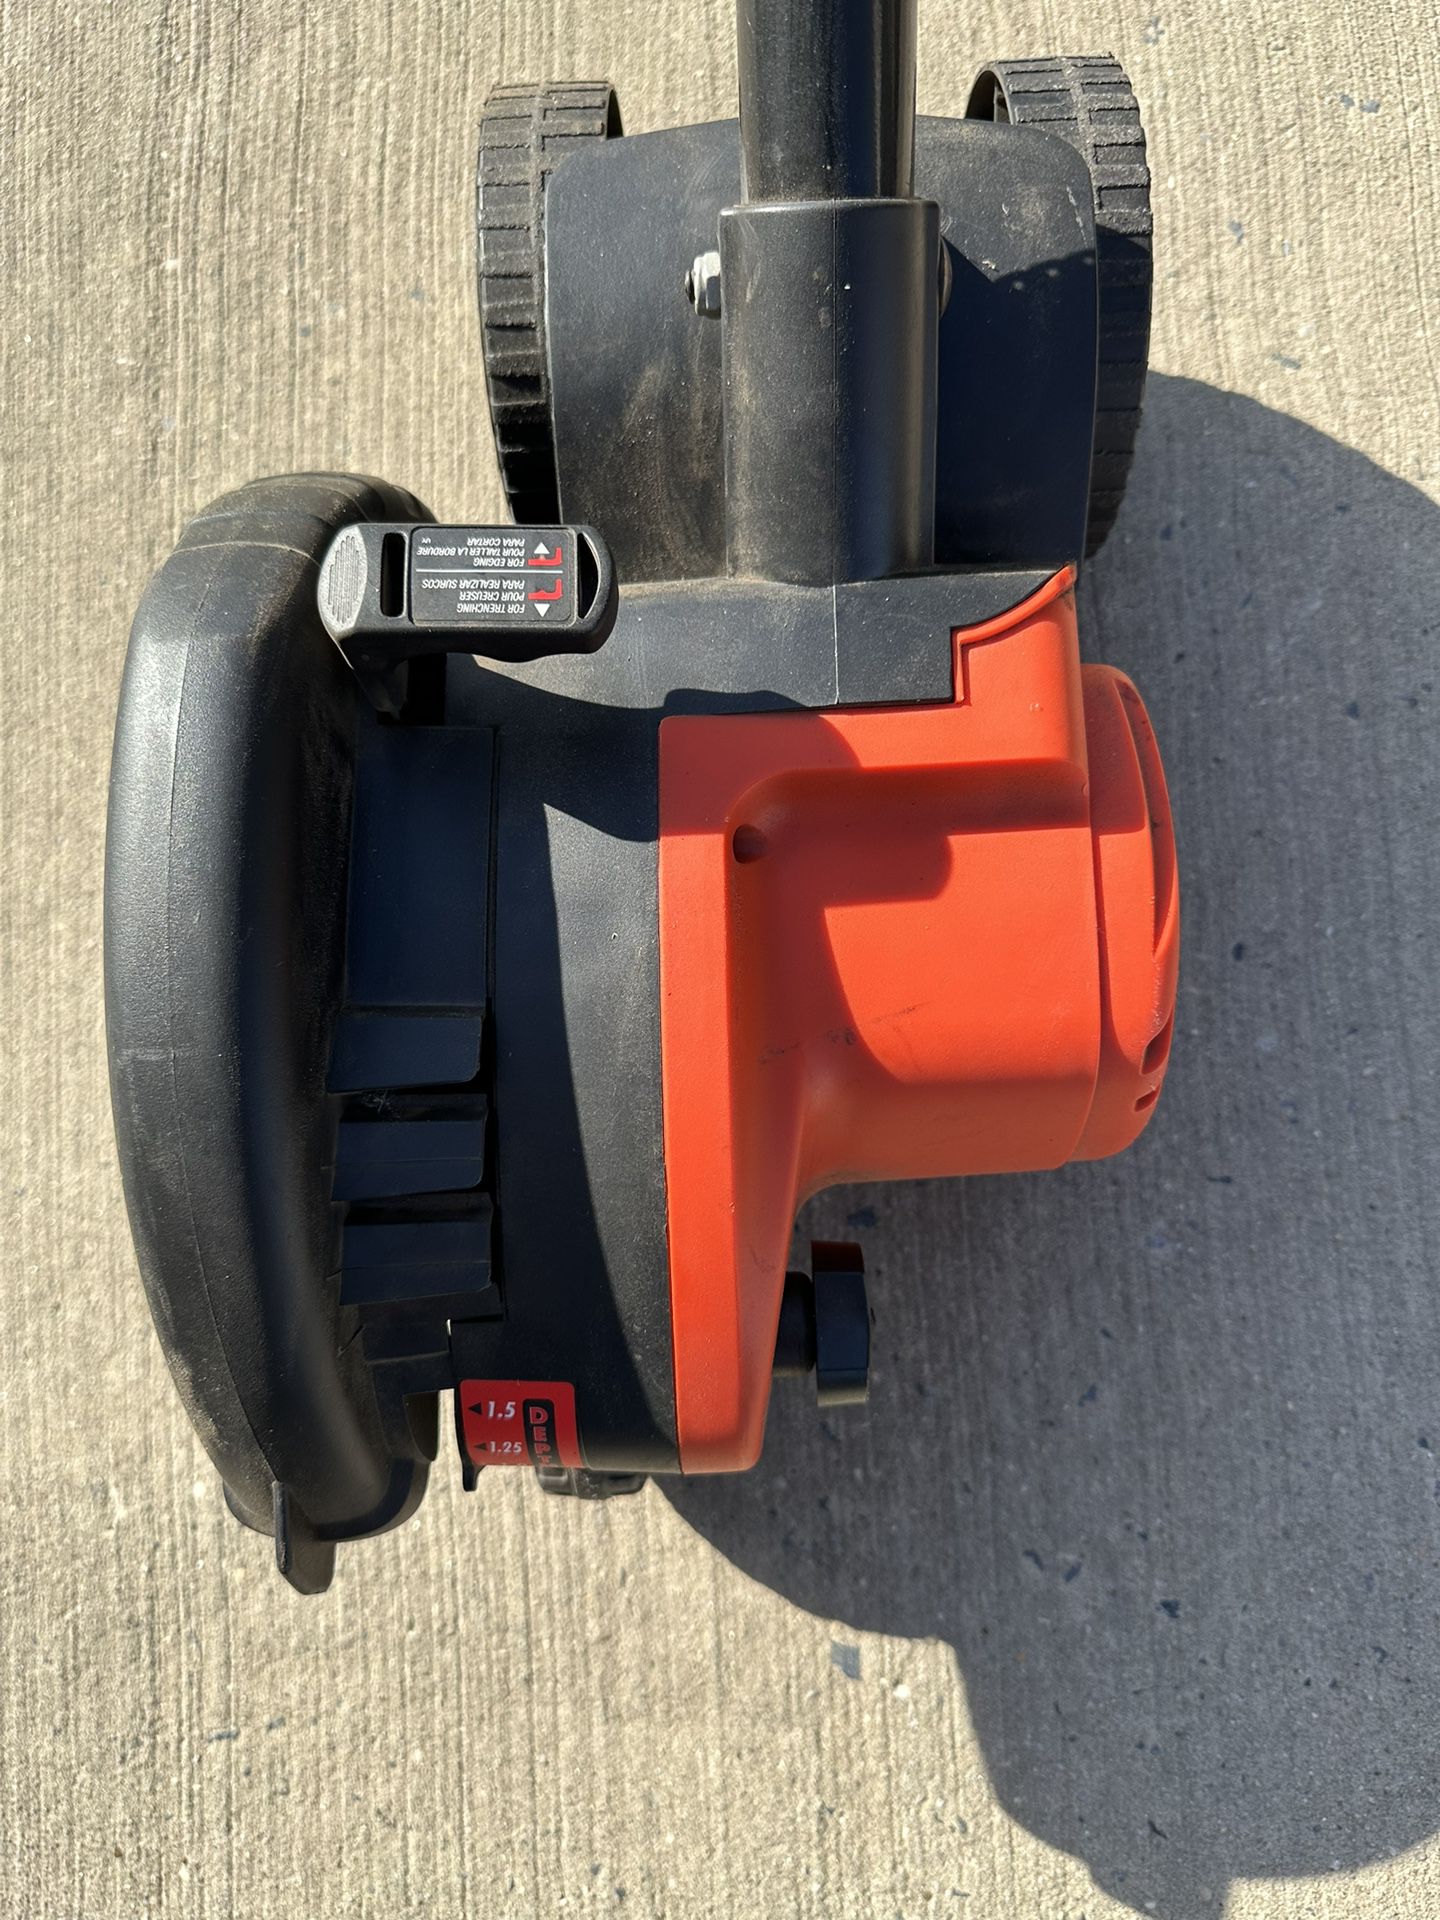 Black And Decker LE750 Electric Edger for Sale in Mineola, NY